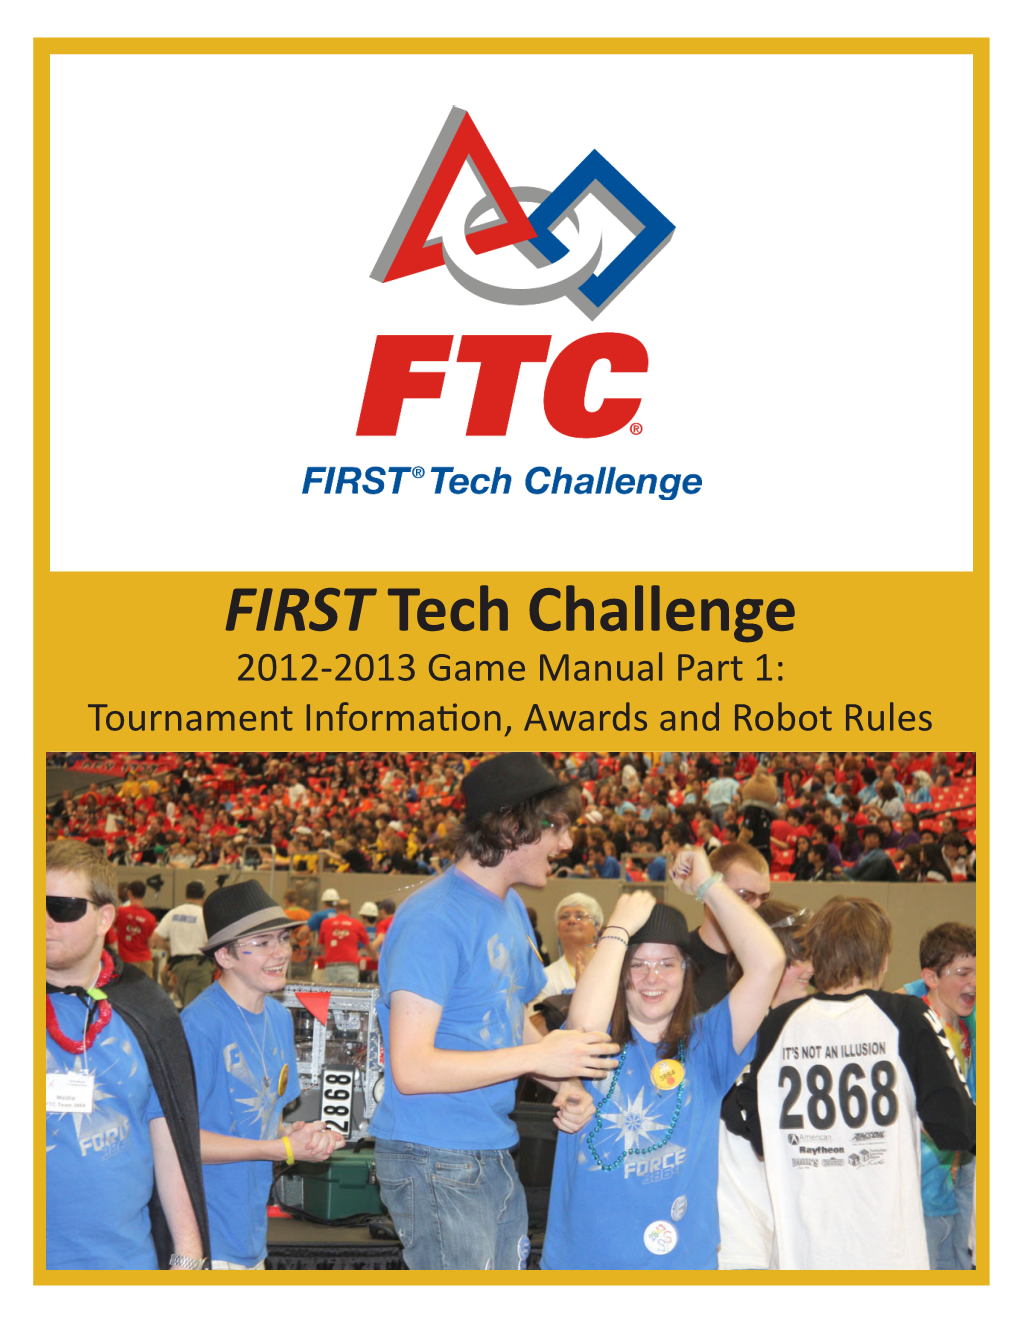 FIRST Tech Challenge 2012-2013 Game Manual Part 1: Tournament Information, Awards and Robot Rules IMPORTANT NOTICE